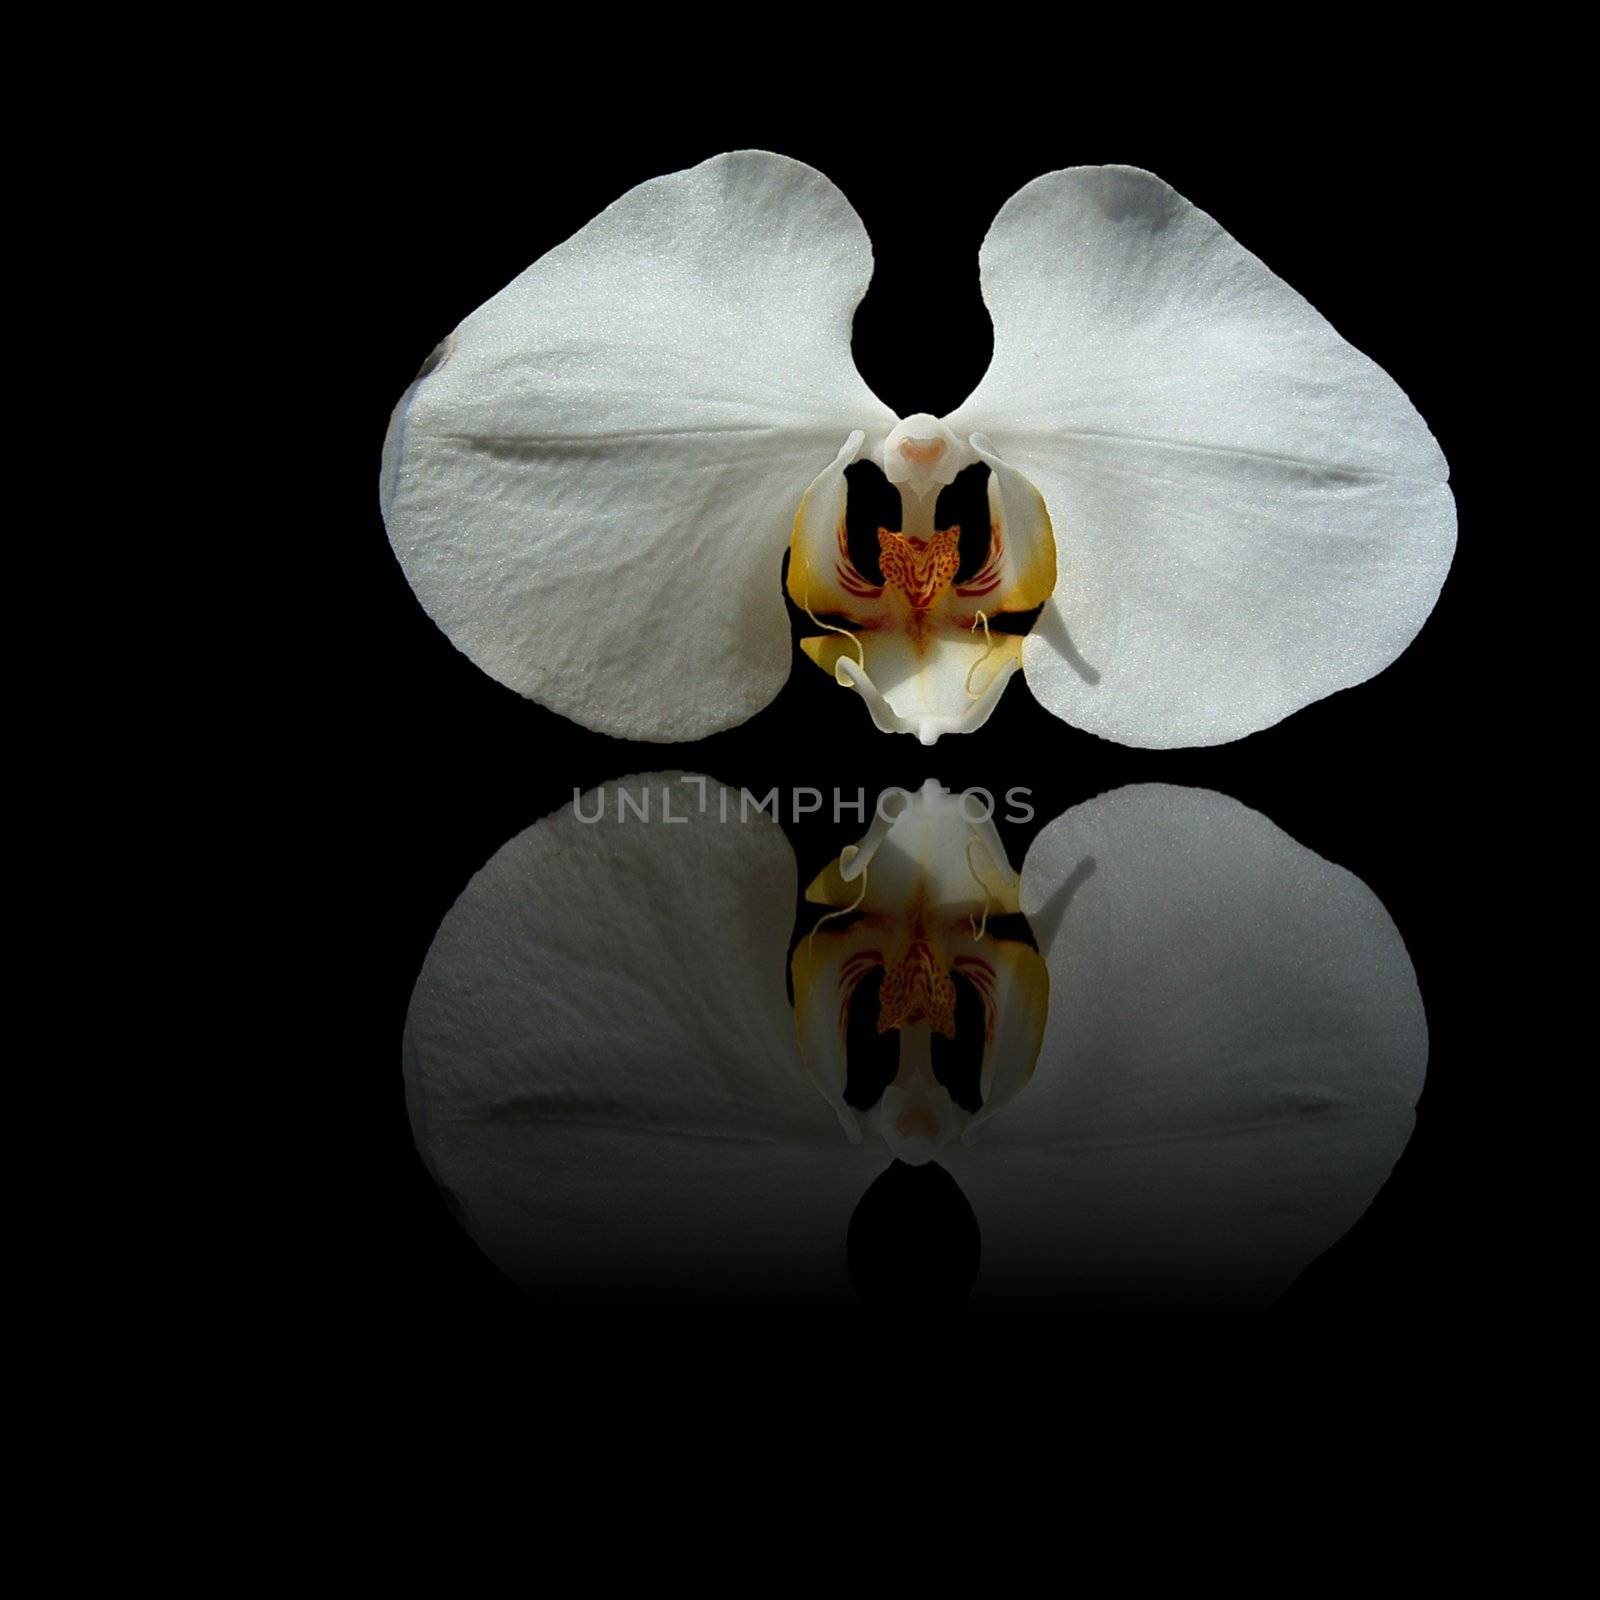 White orchid with yellow center and reflection on black background.